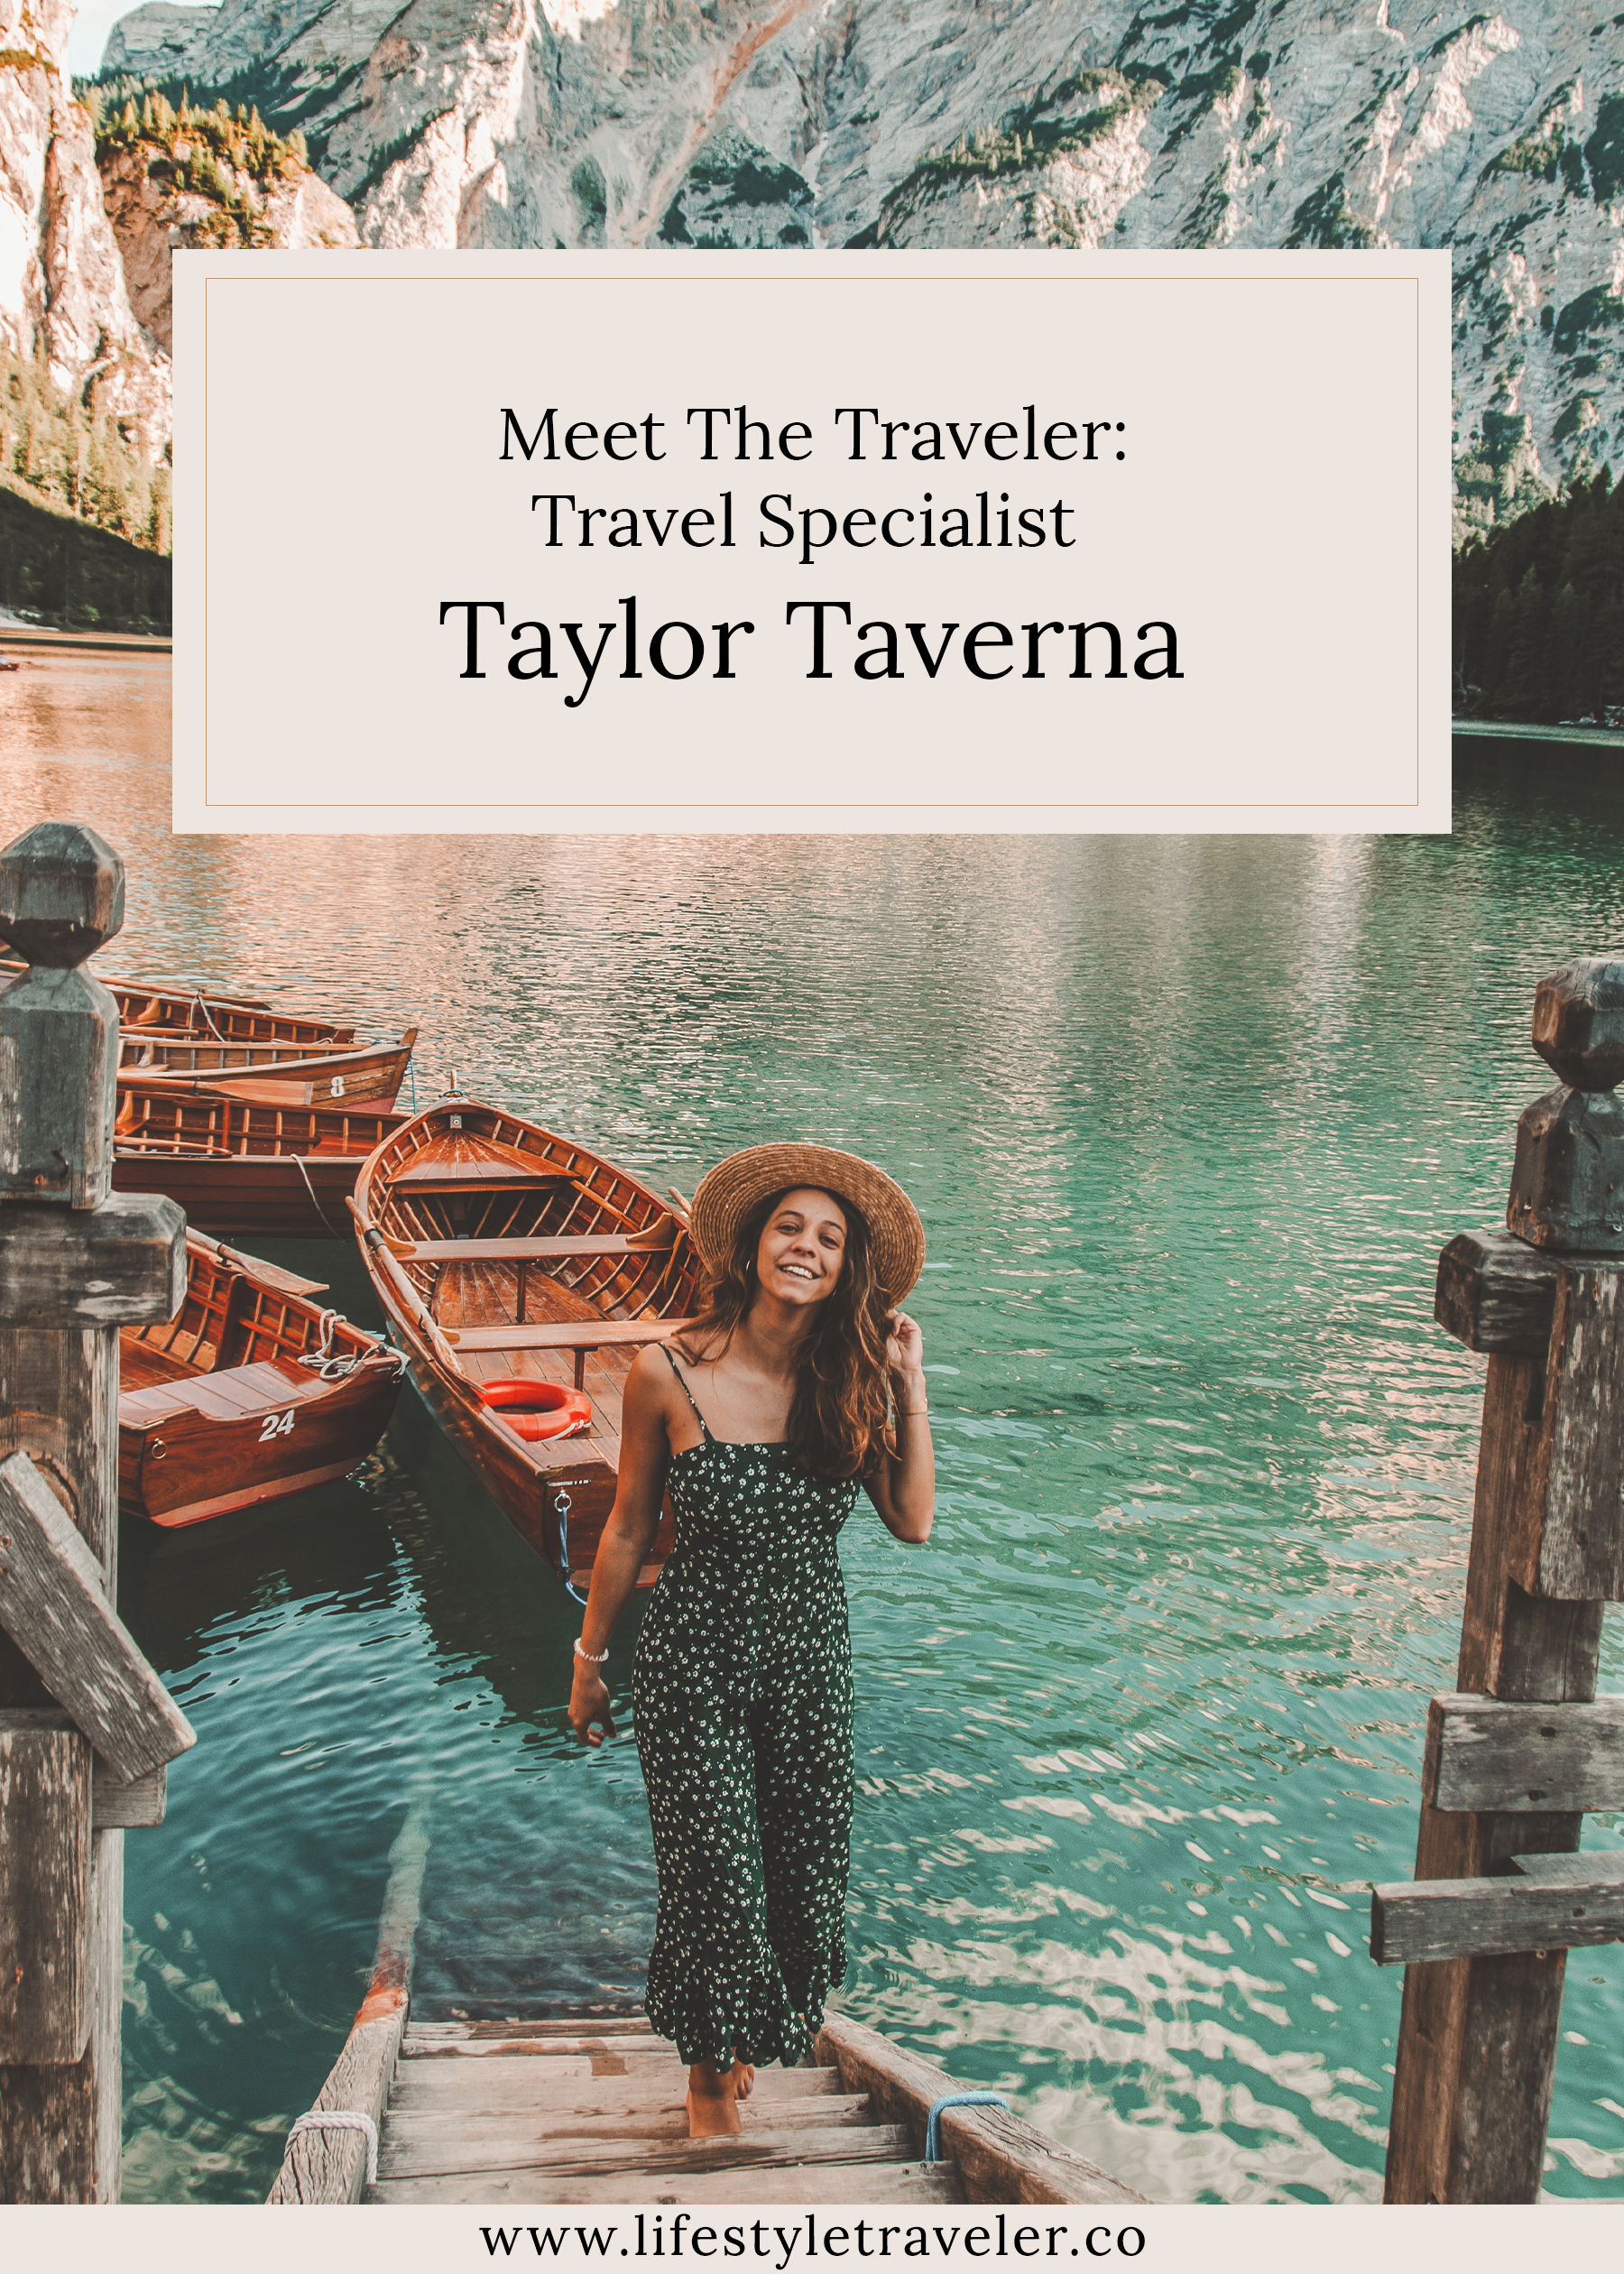 Meet The Traveler: Travel Specialist Taylor Taverna | lifestyletraveler.co | IG: @lifestyletraveler.co | Photo by: Taylor Taverna